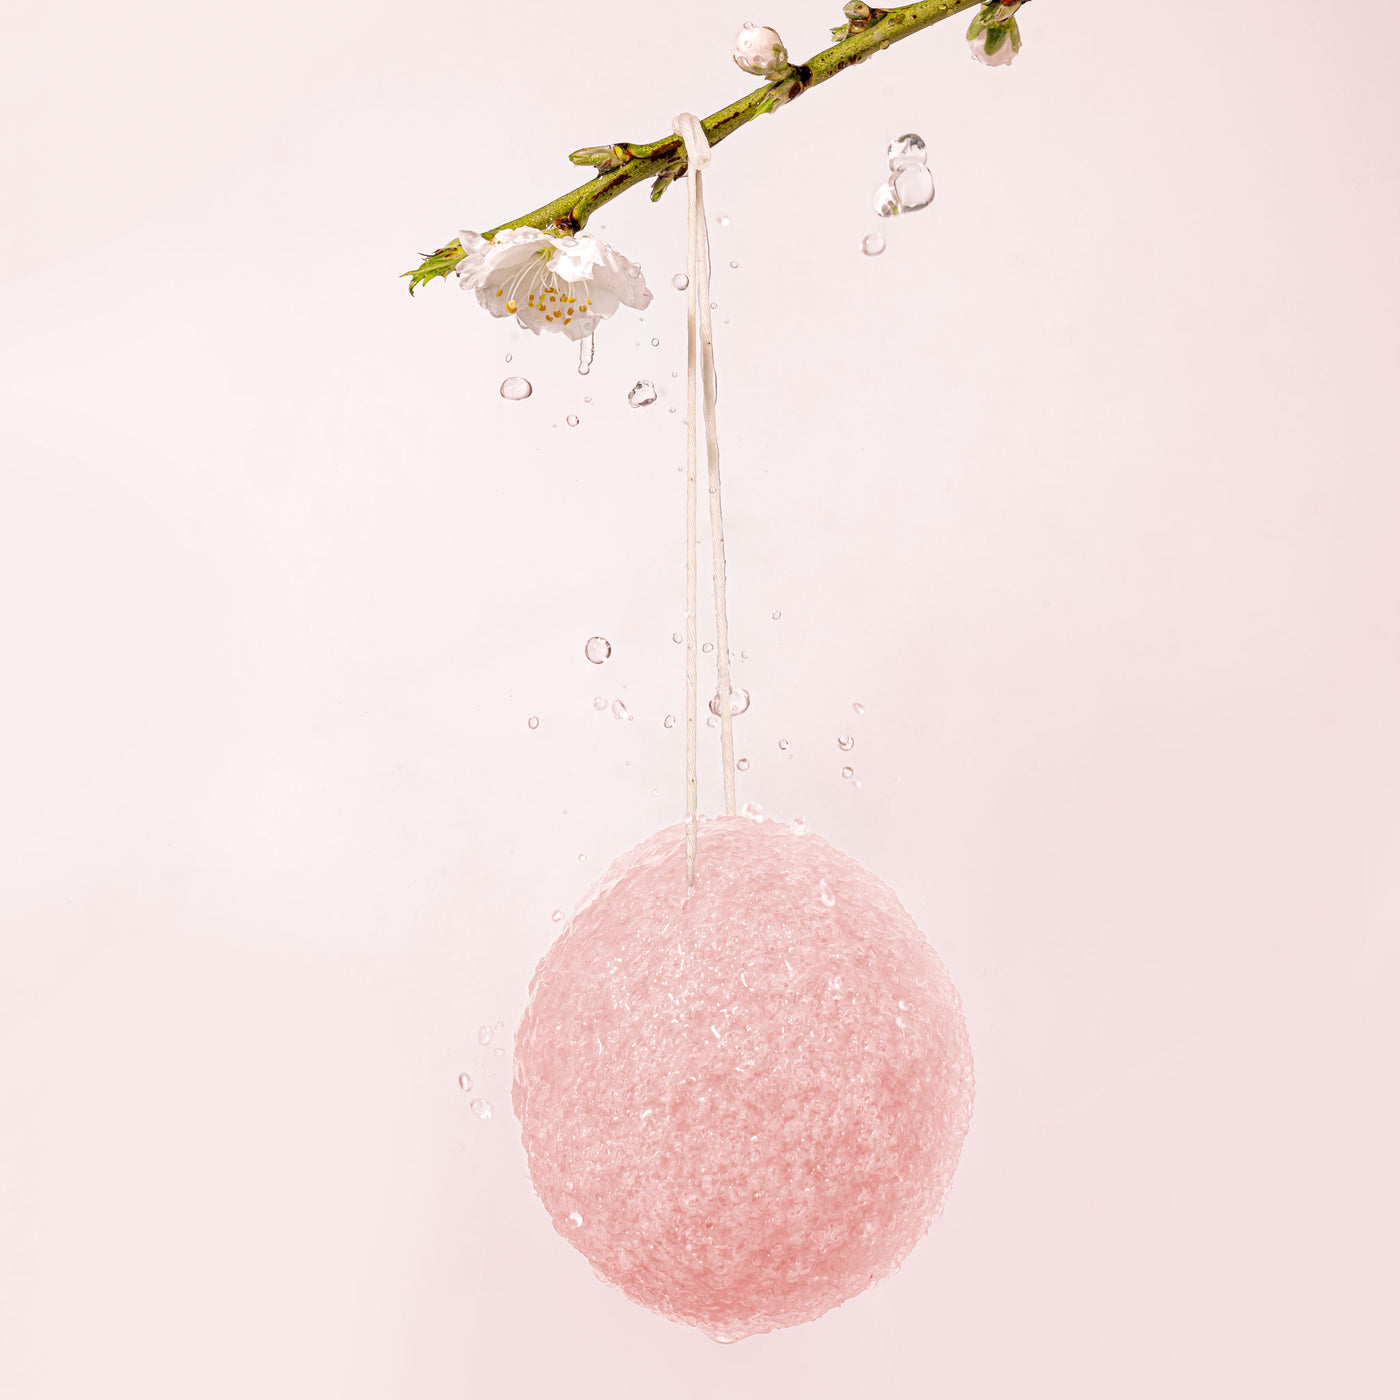 konjac sponge made in Japan Gently exfoliates and cleanses skin, with a soft, bouncy pudding like texture when soaked in water, cherry blossom Konjac Sponge